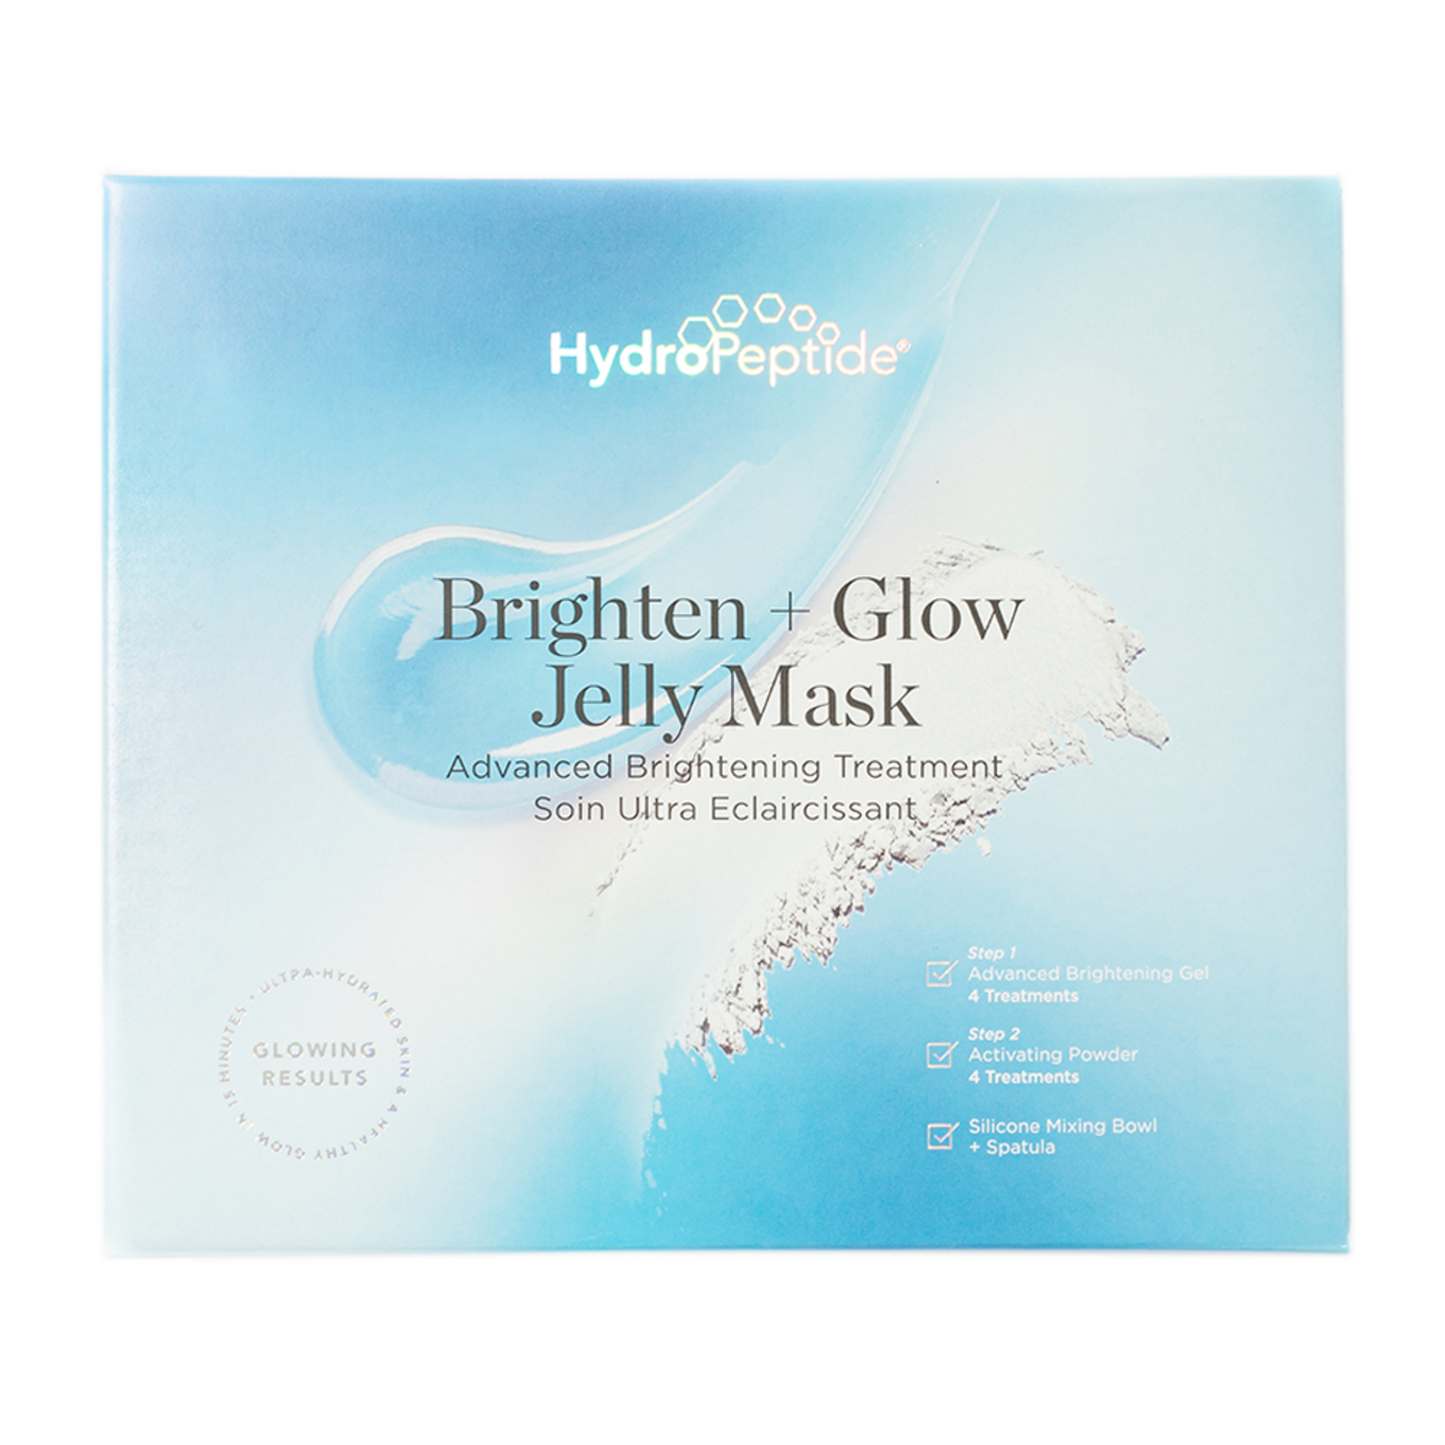 HydroPeptide Brighten and Glow Jelly Mask Advanced Brightening Treatment